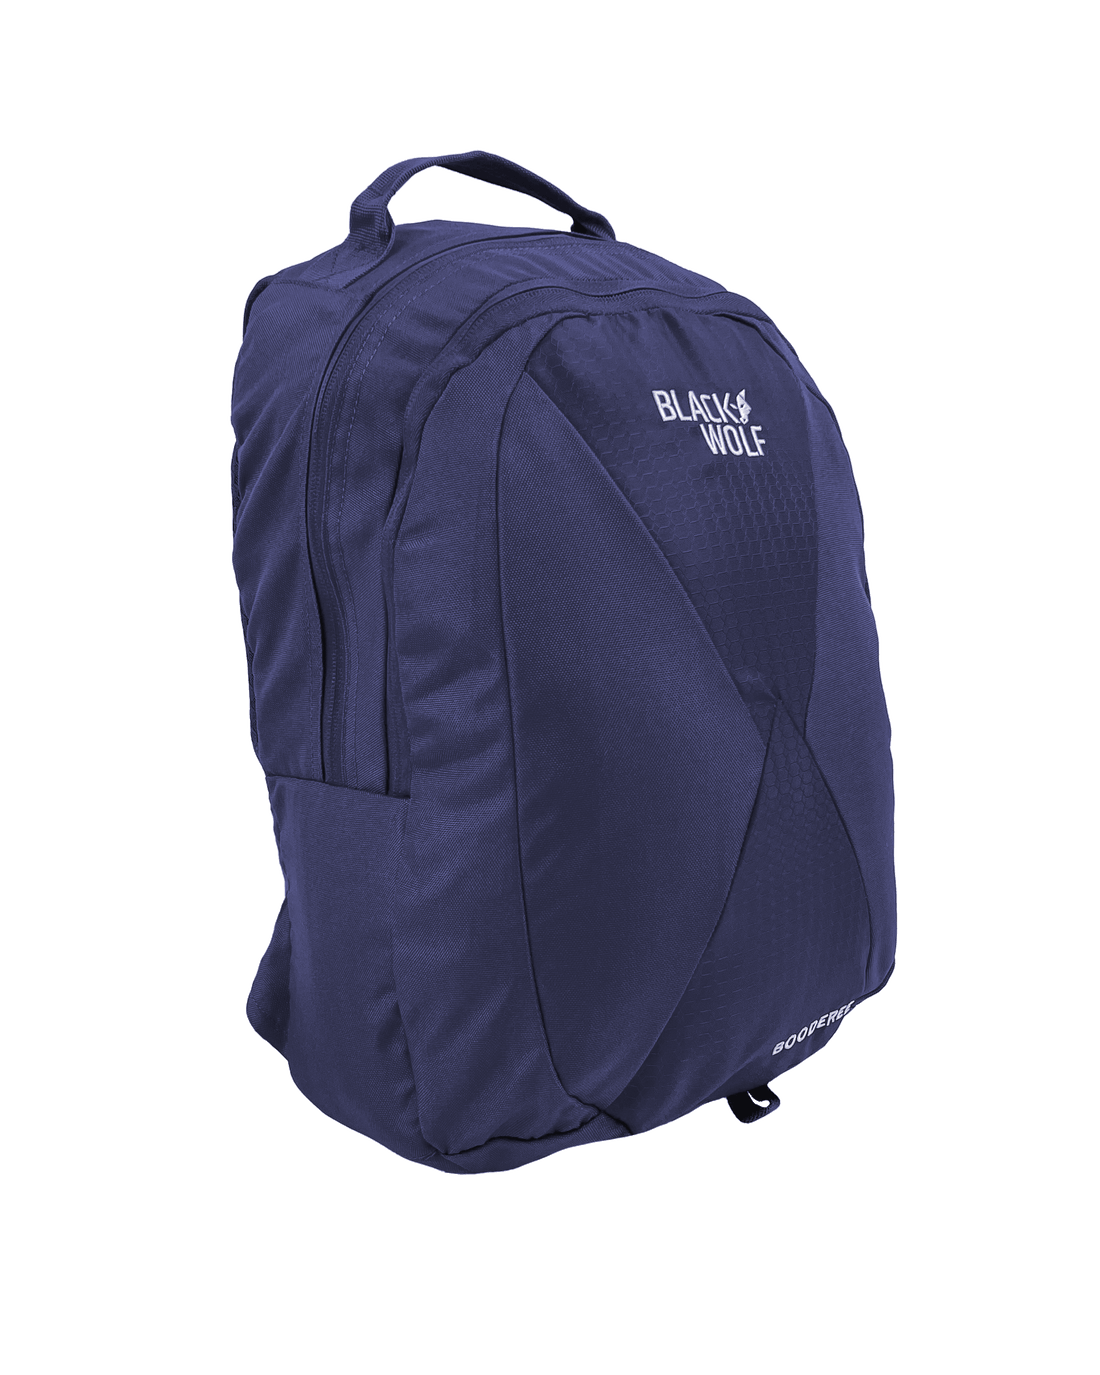 Black Wolf - Booderee 20L Backpack - Eclipse